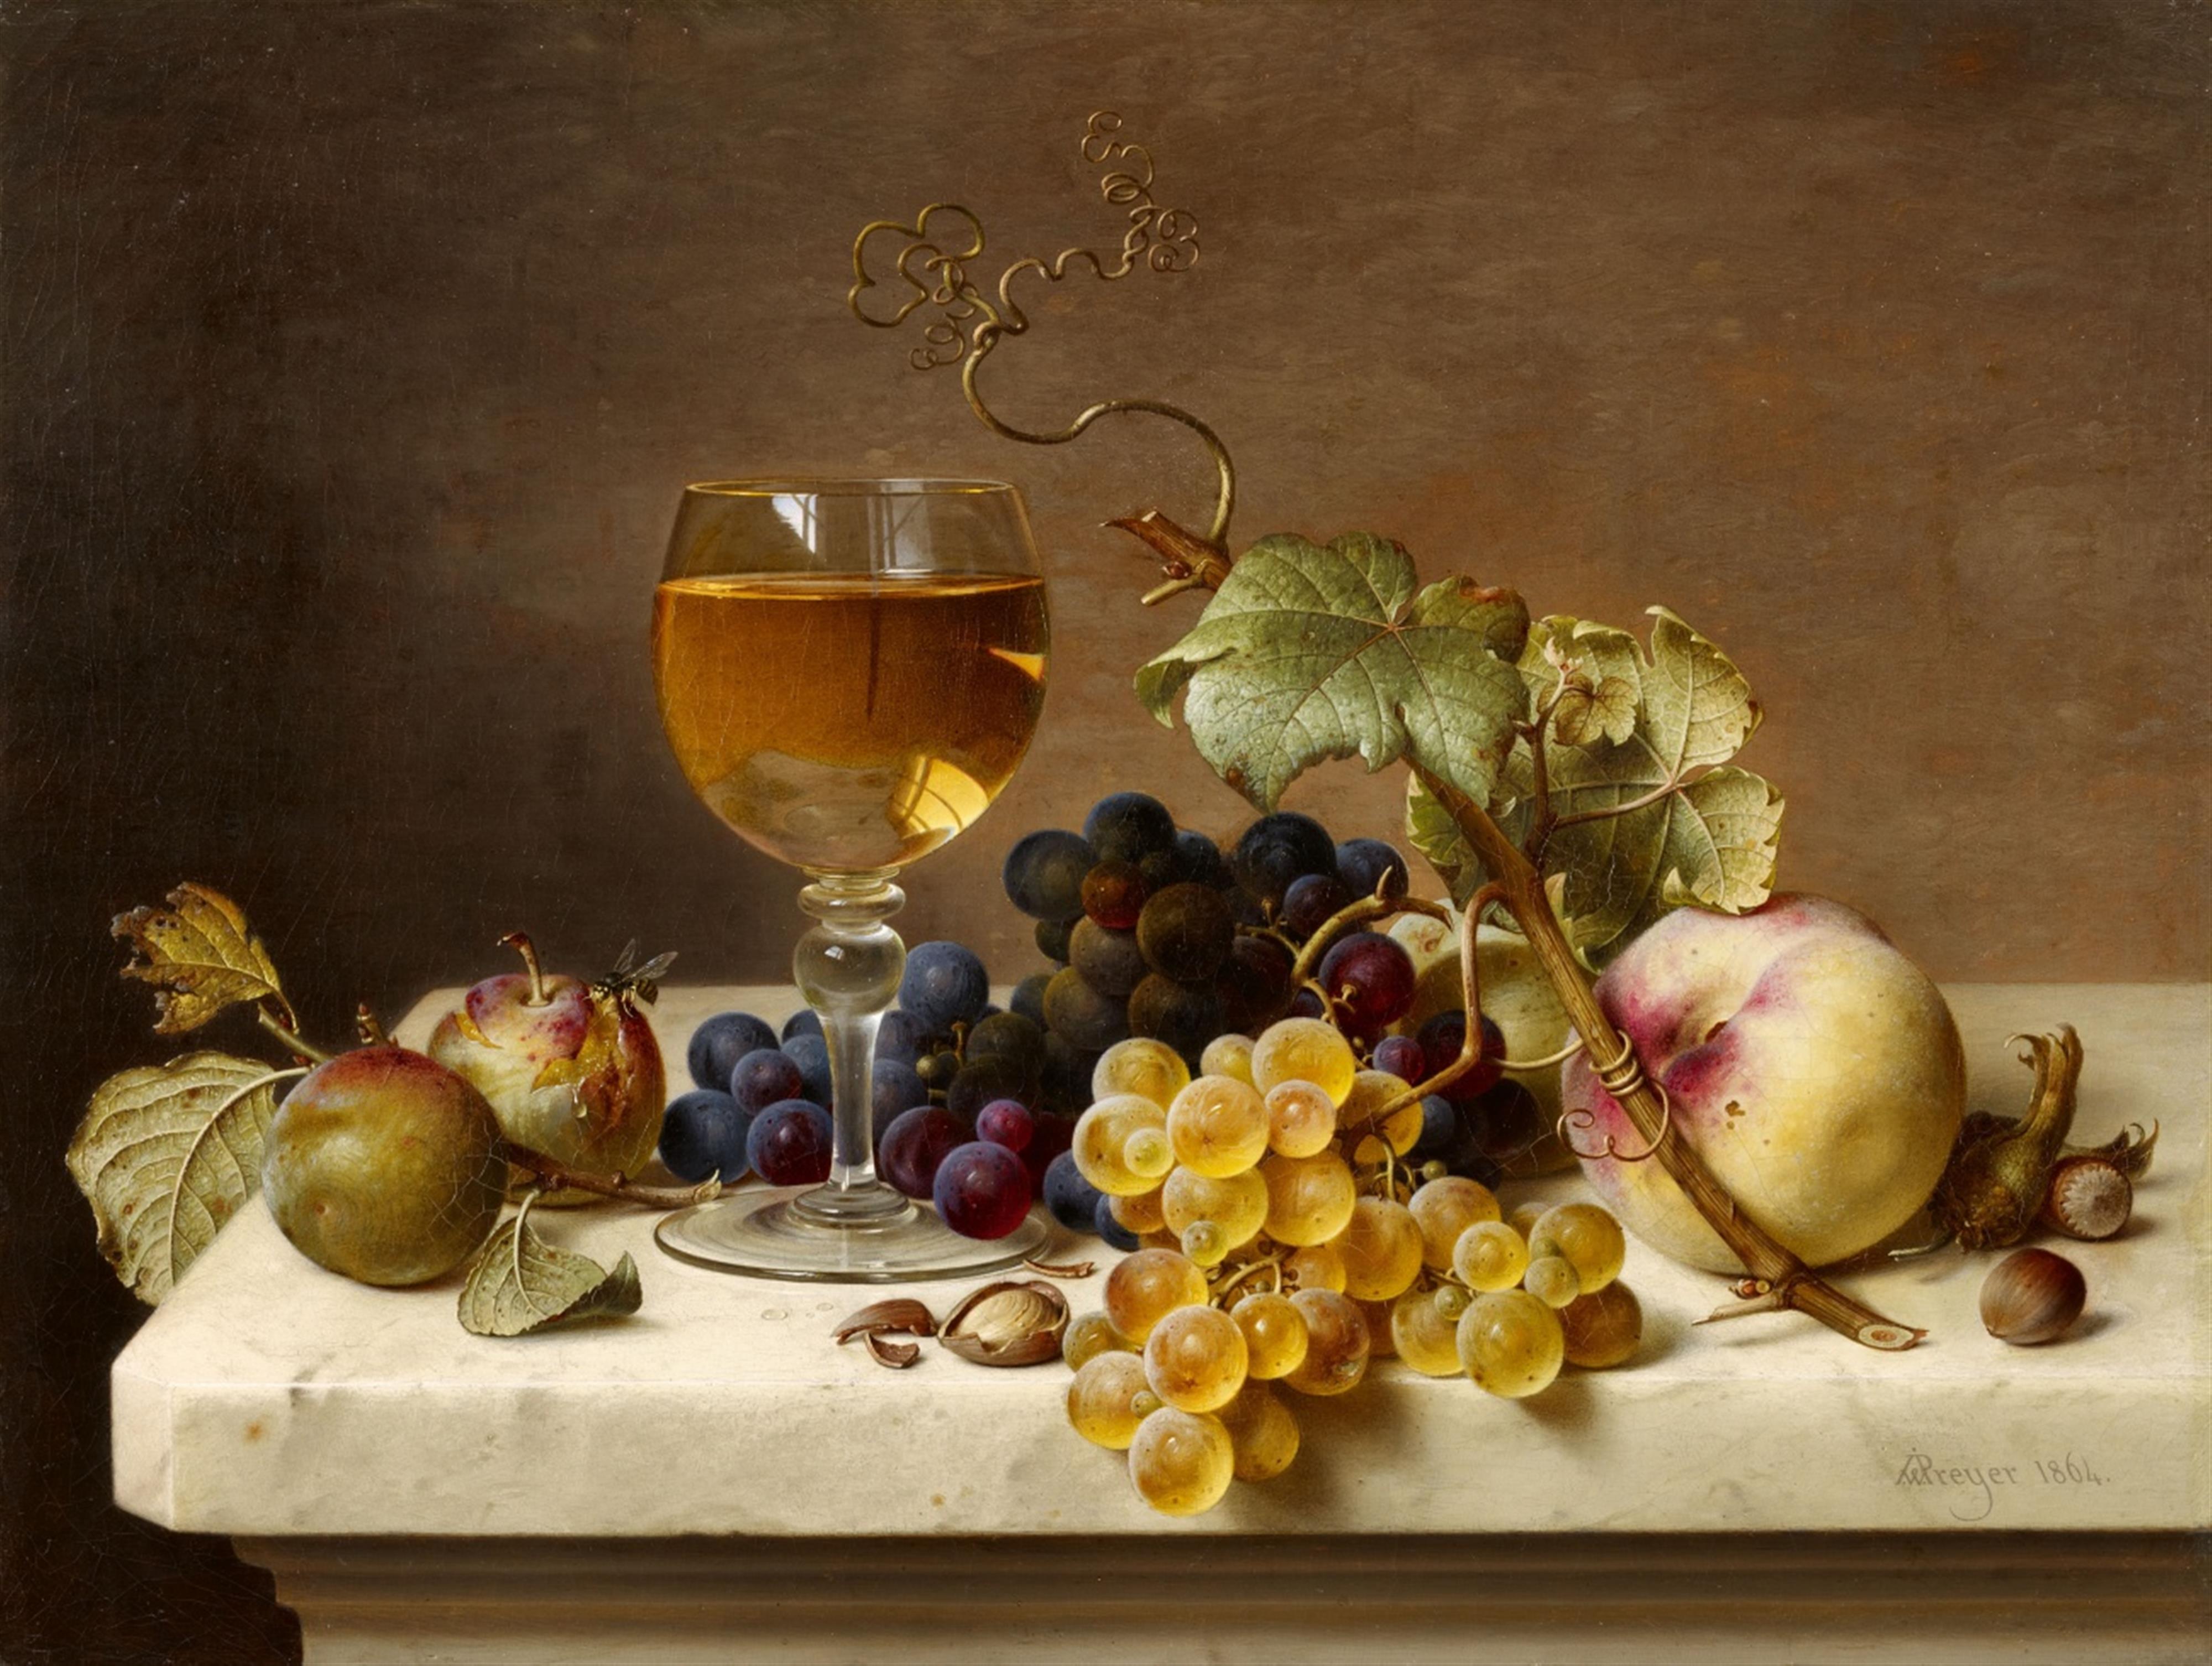 Johann Wilhelm Preyer - Fruit Still Life with Greengages, a Glass of Wine, Grapes, Peaches, and Hazelnuts on a Marble Slab